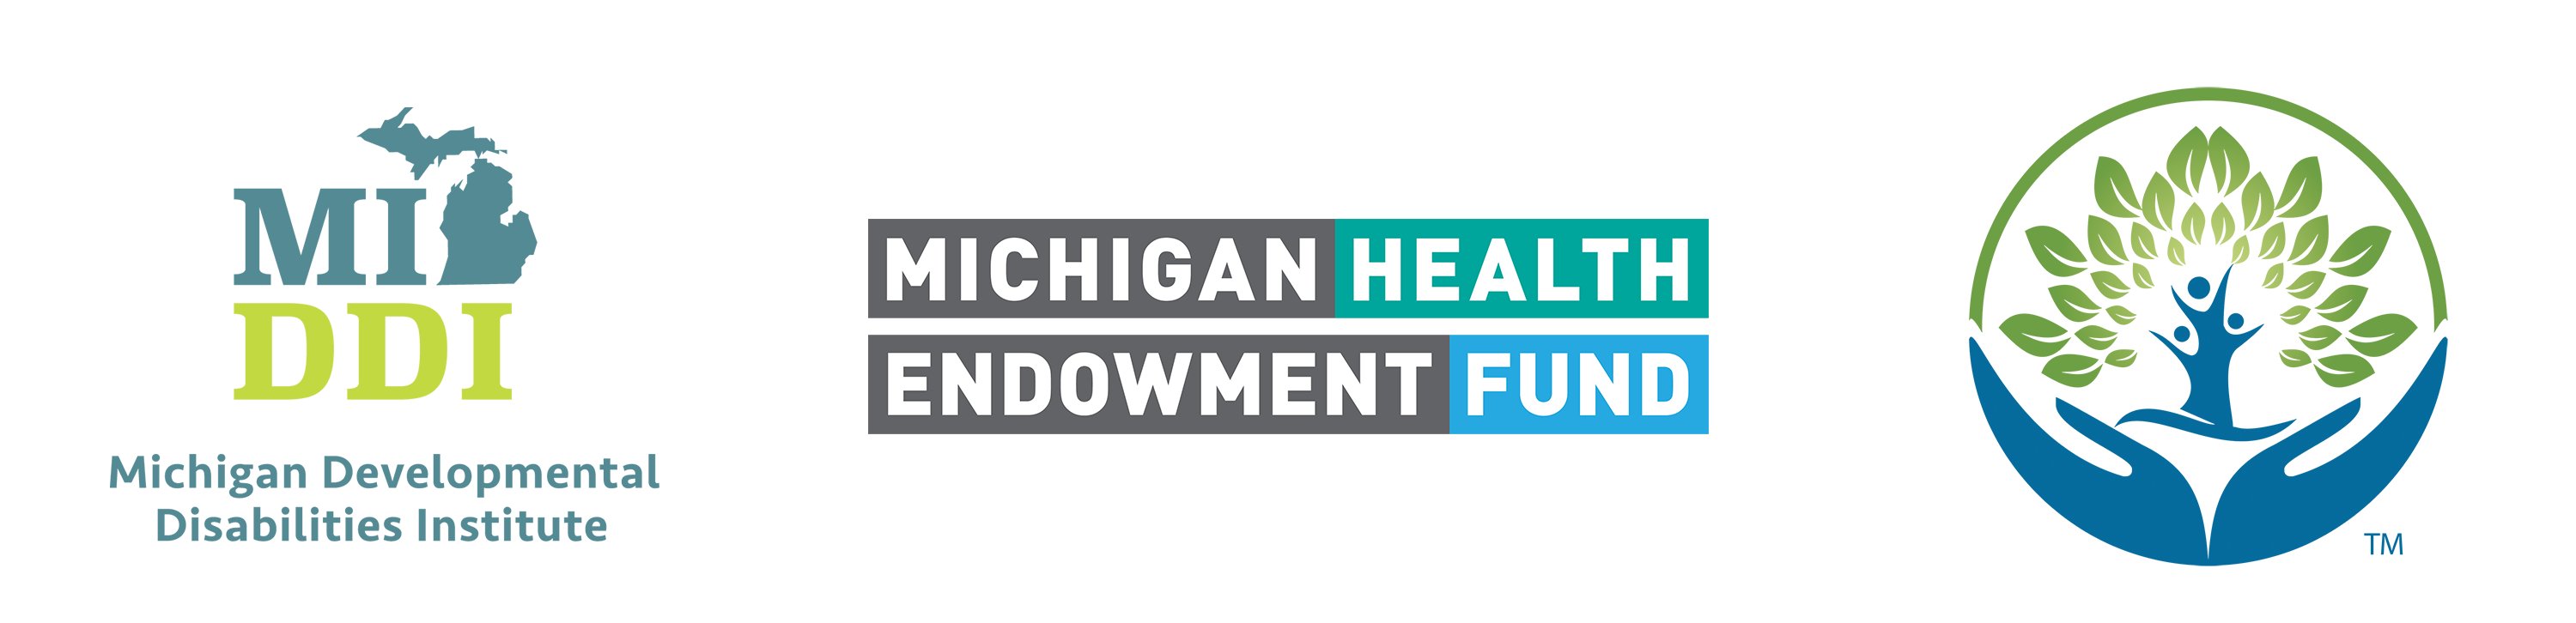 Banner with the logos for MI-DDI, Michigan Health Endowment Fund, and Hope Trust.